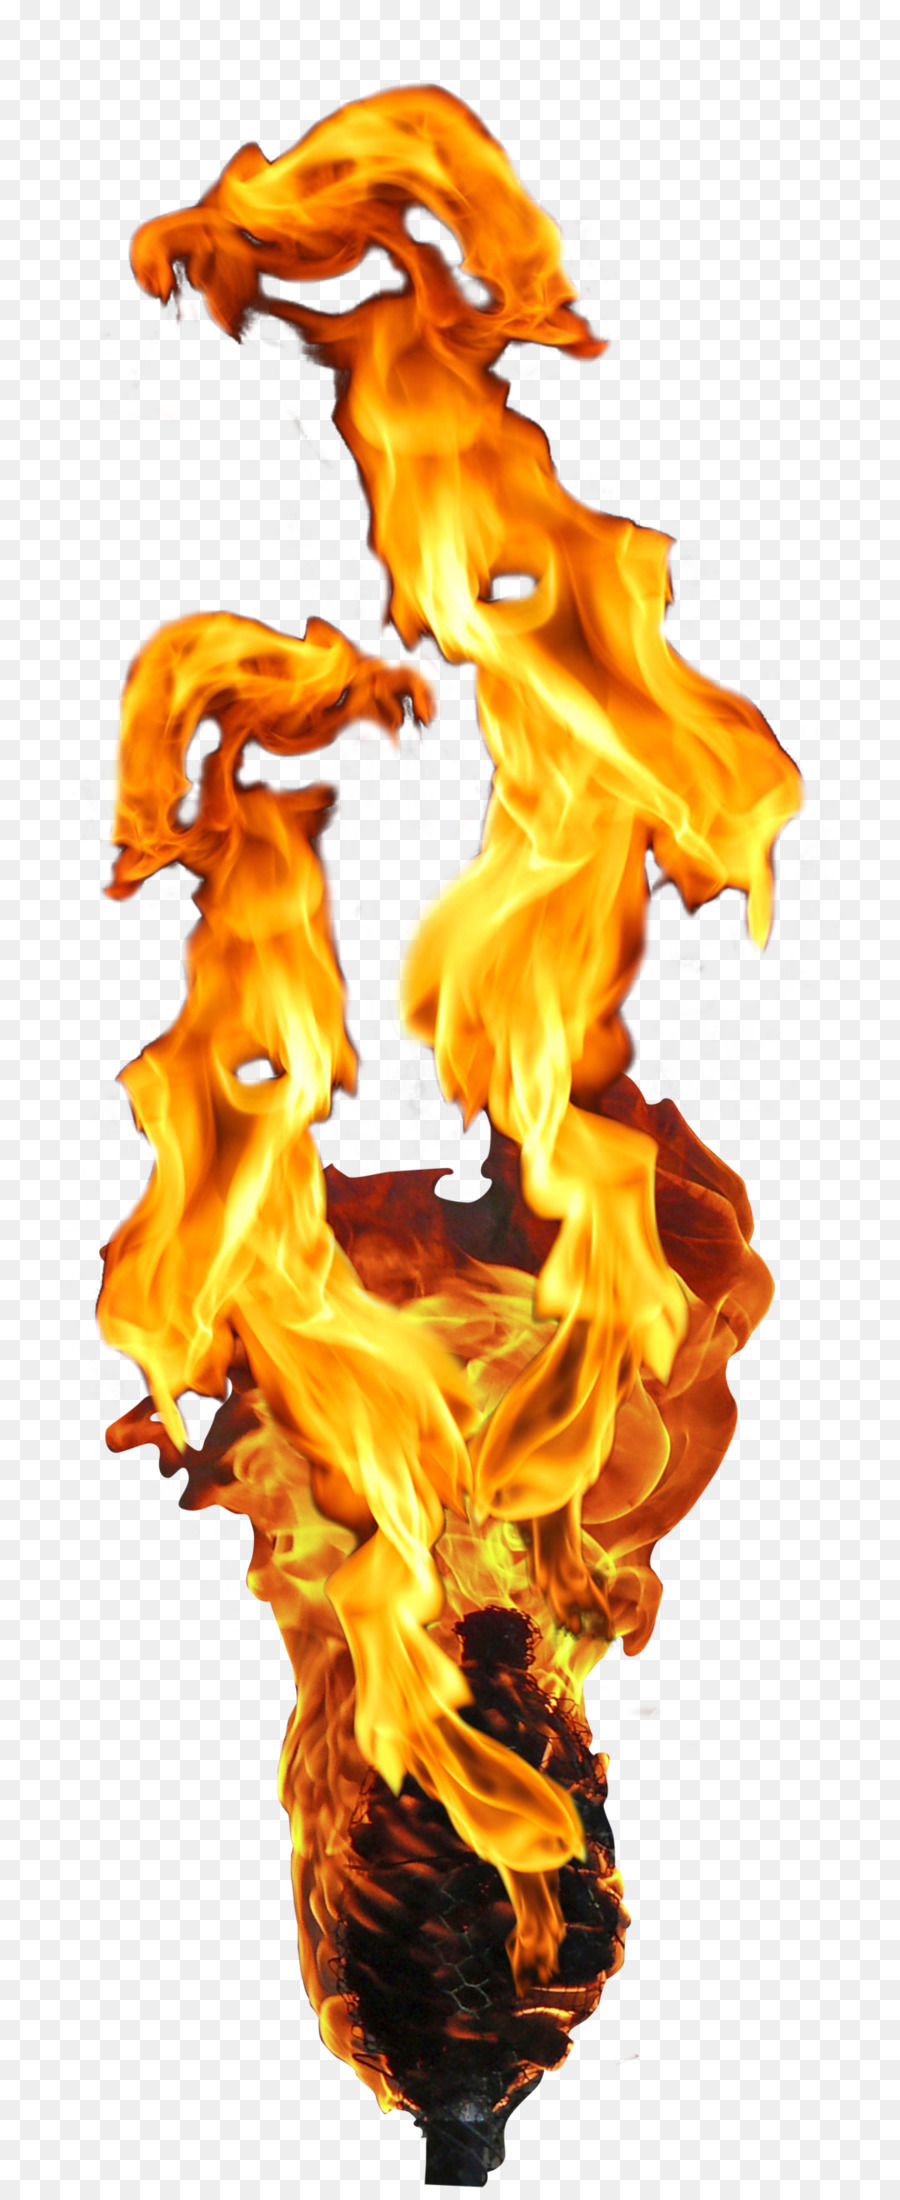 Flame Light Fire Torch - I flame png download - 1024*2501 - Free Transparent Flame png Download.